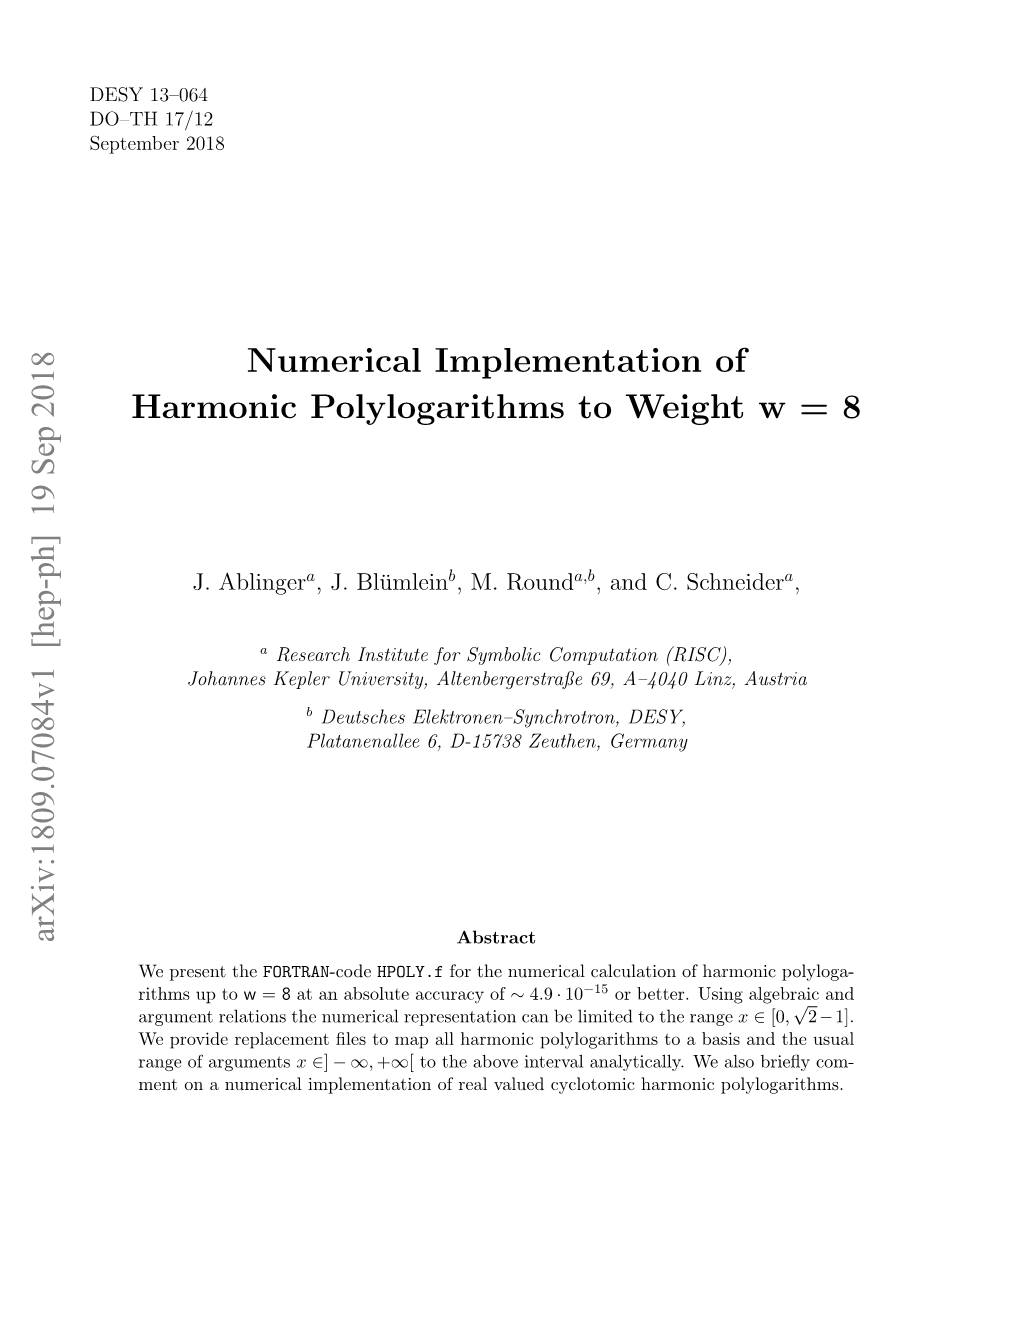 Numerical Implementation of Harmonic Polylogarithms to Weight W = 8